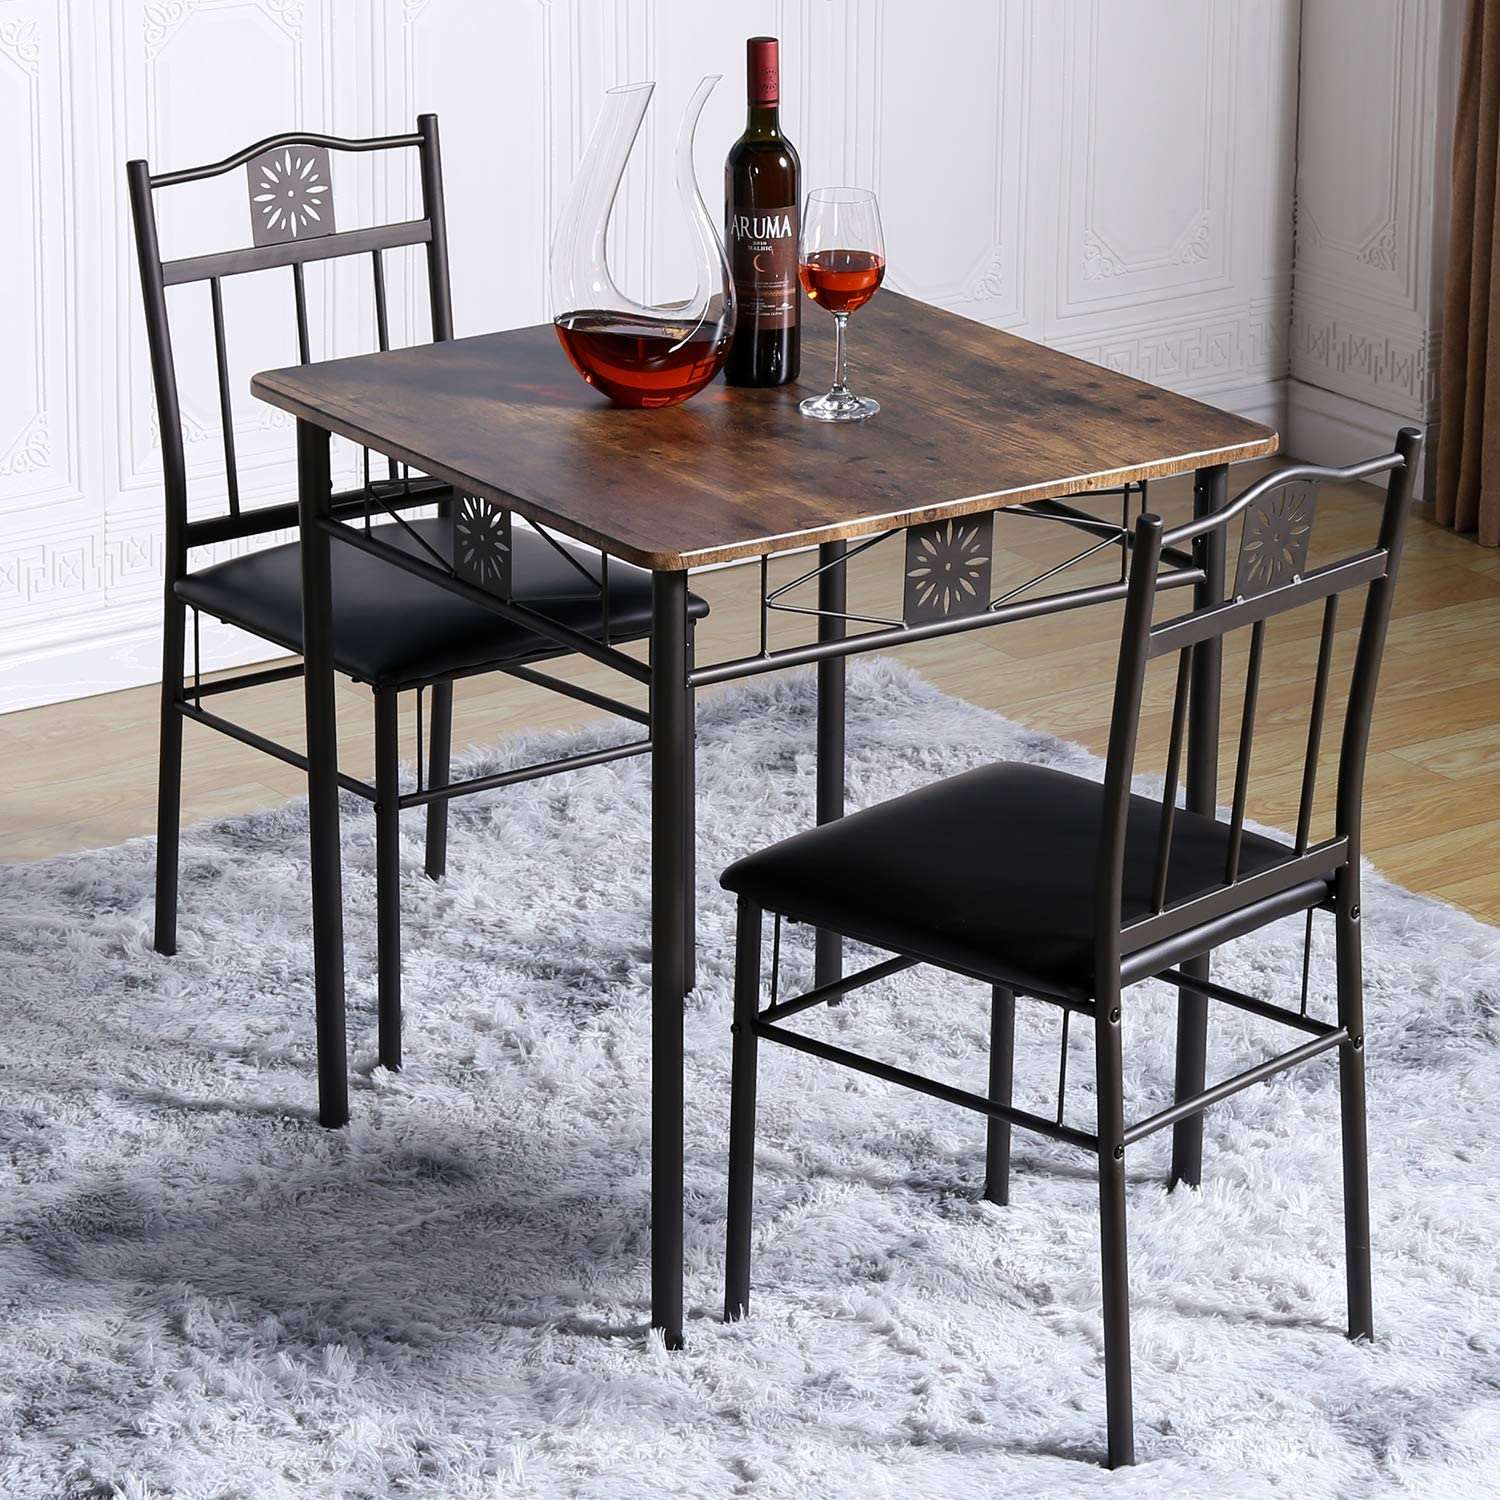 3-Piece Dining Table Set